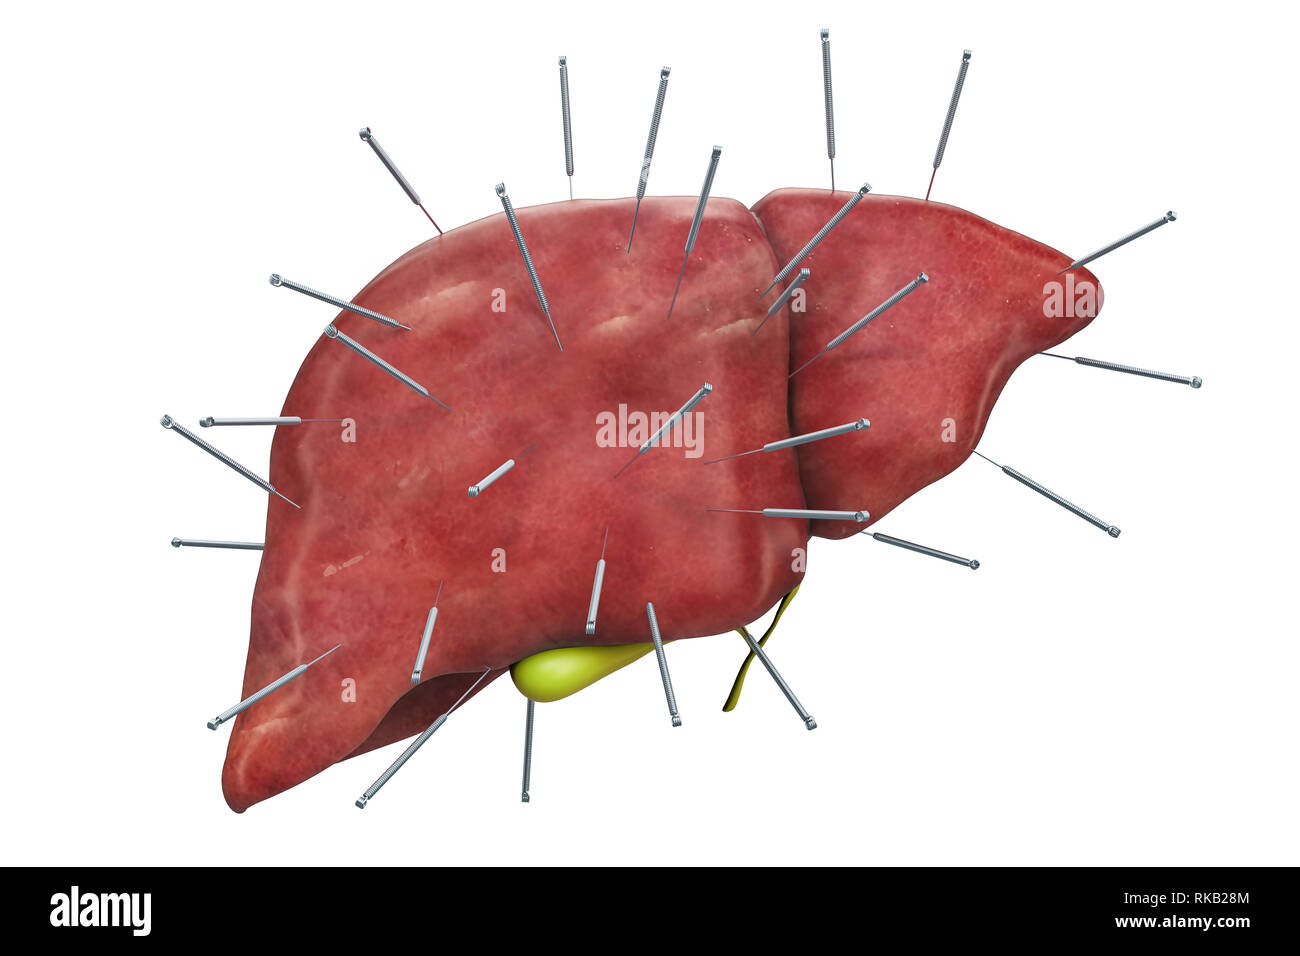 Human liver with acupuncture needles. Acupuncture treatment of liver concept, 3D rendering isolated on white background Stock Photo